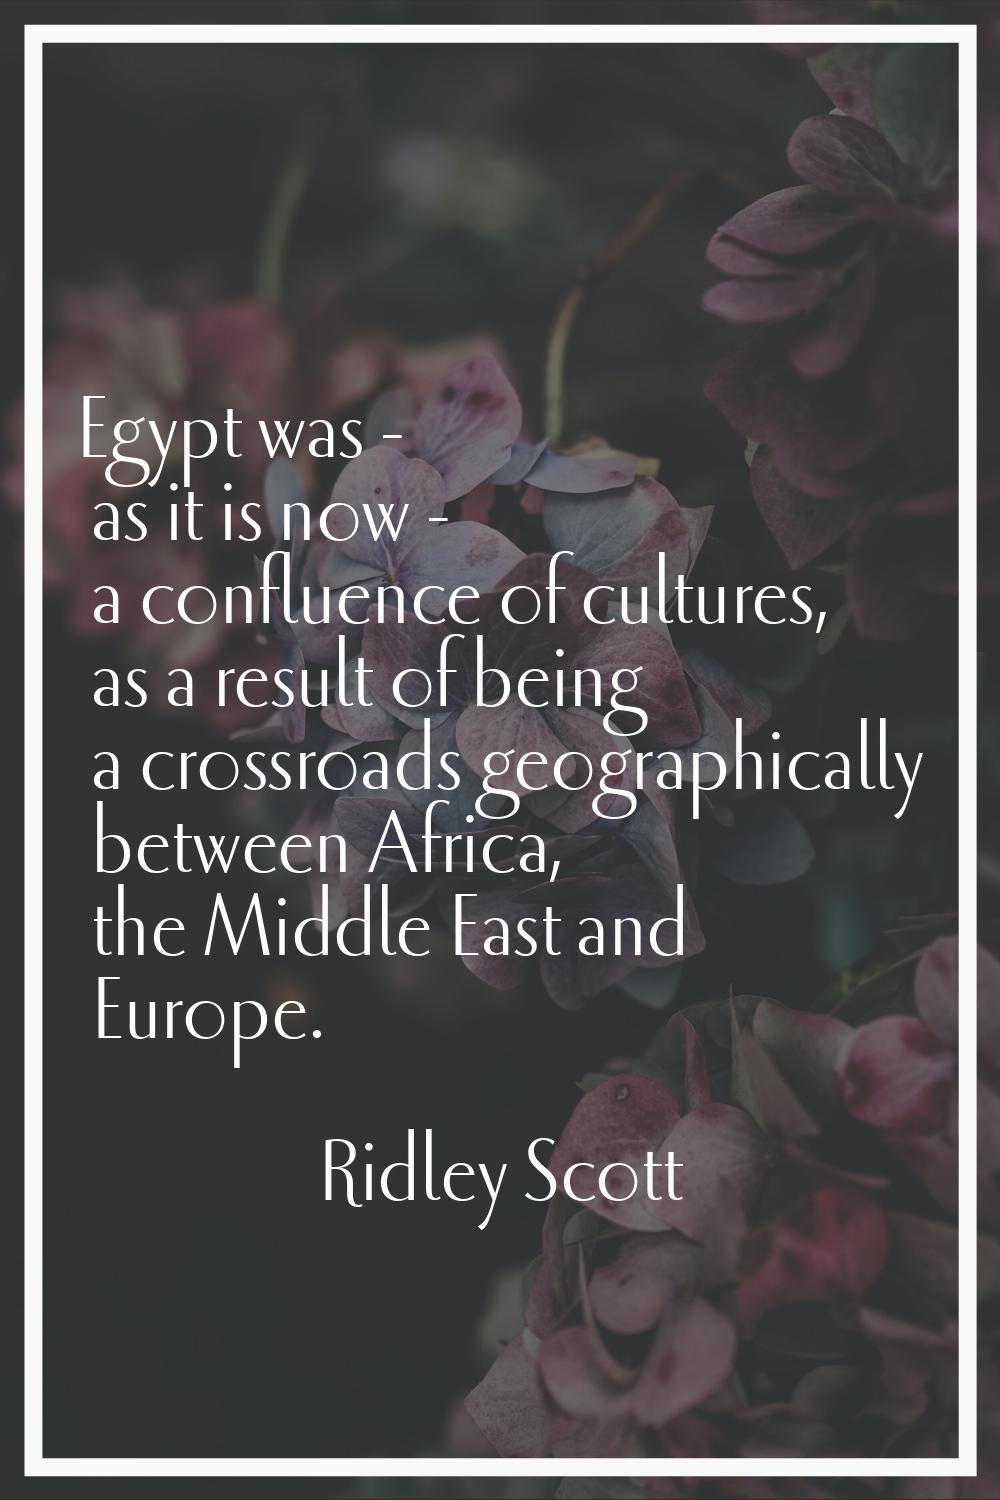 Egypt was - as it is now - a confluence of cultures, as a result of being a crossroads geographical